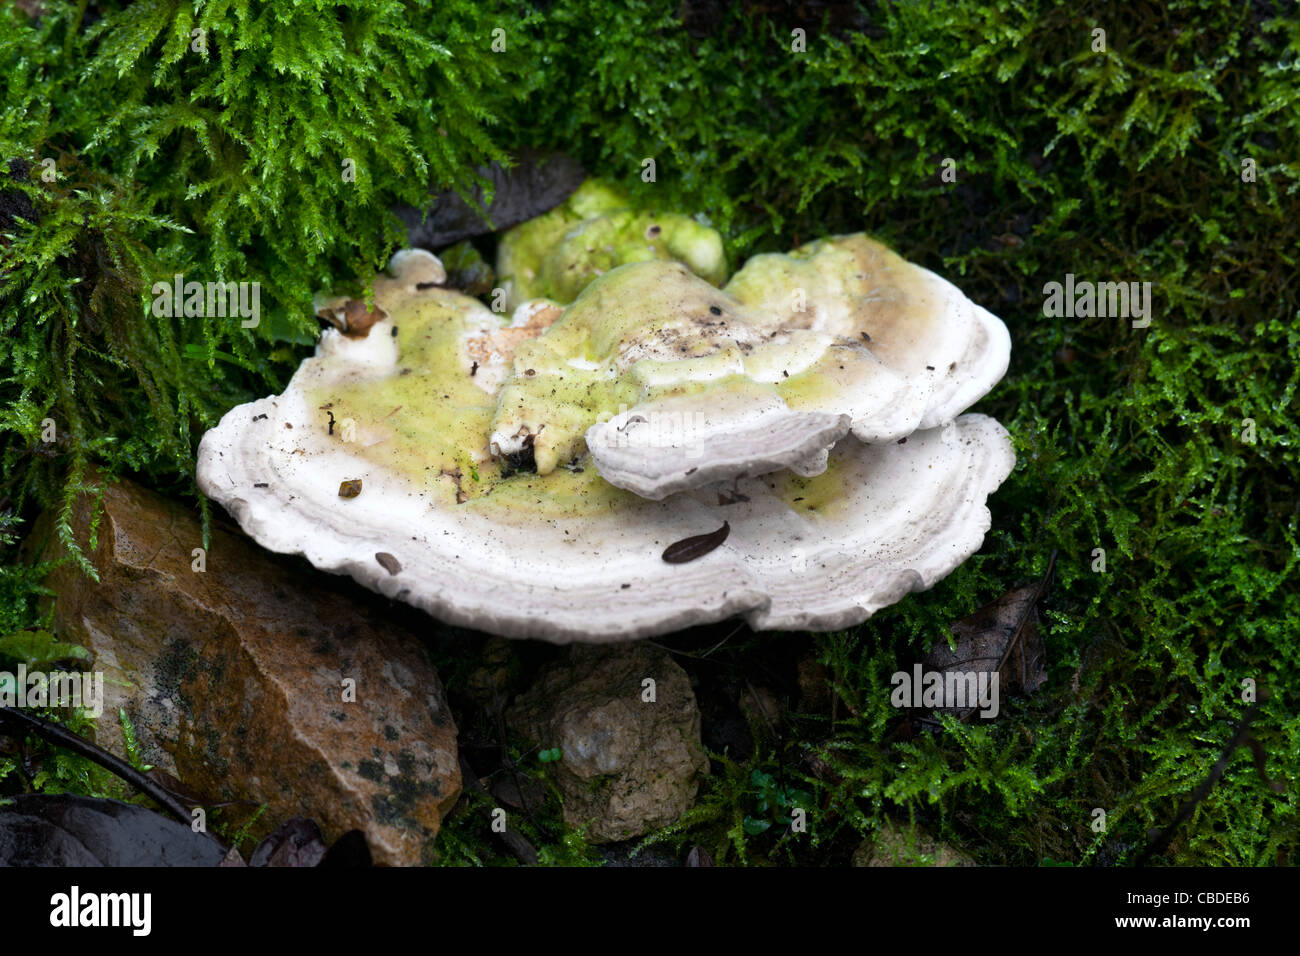 Pseudotrametes gibbosa fungi fruiting body growing in moss on a dead tree stump Stock Photo